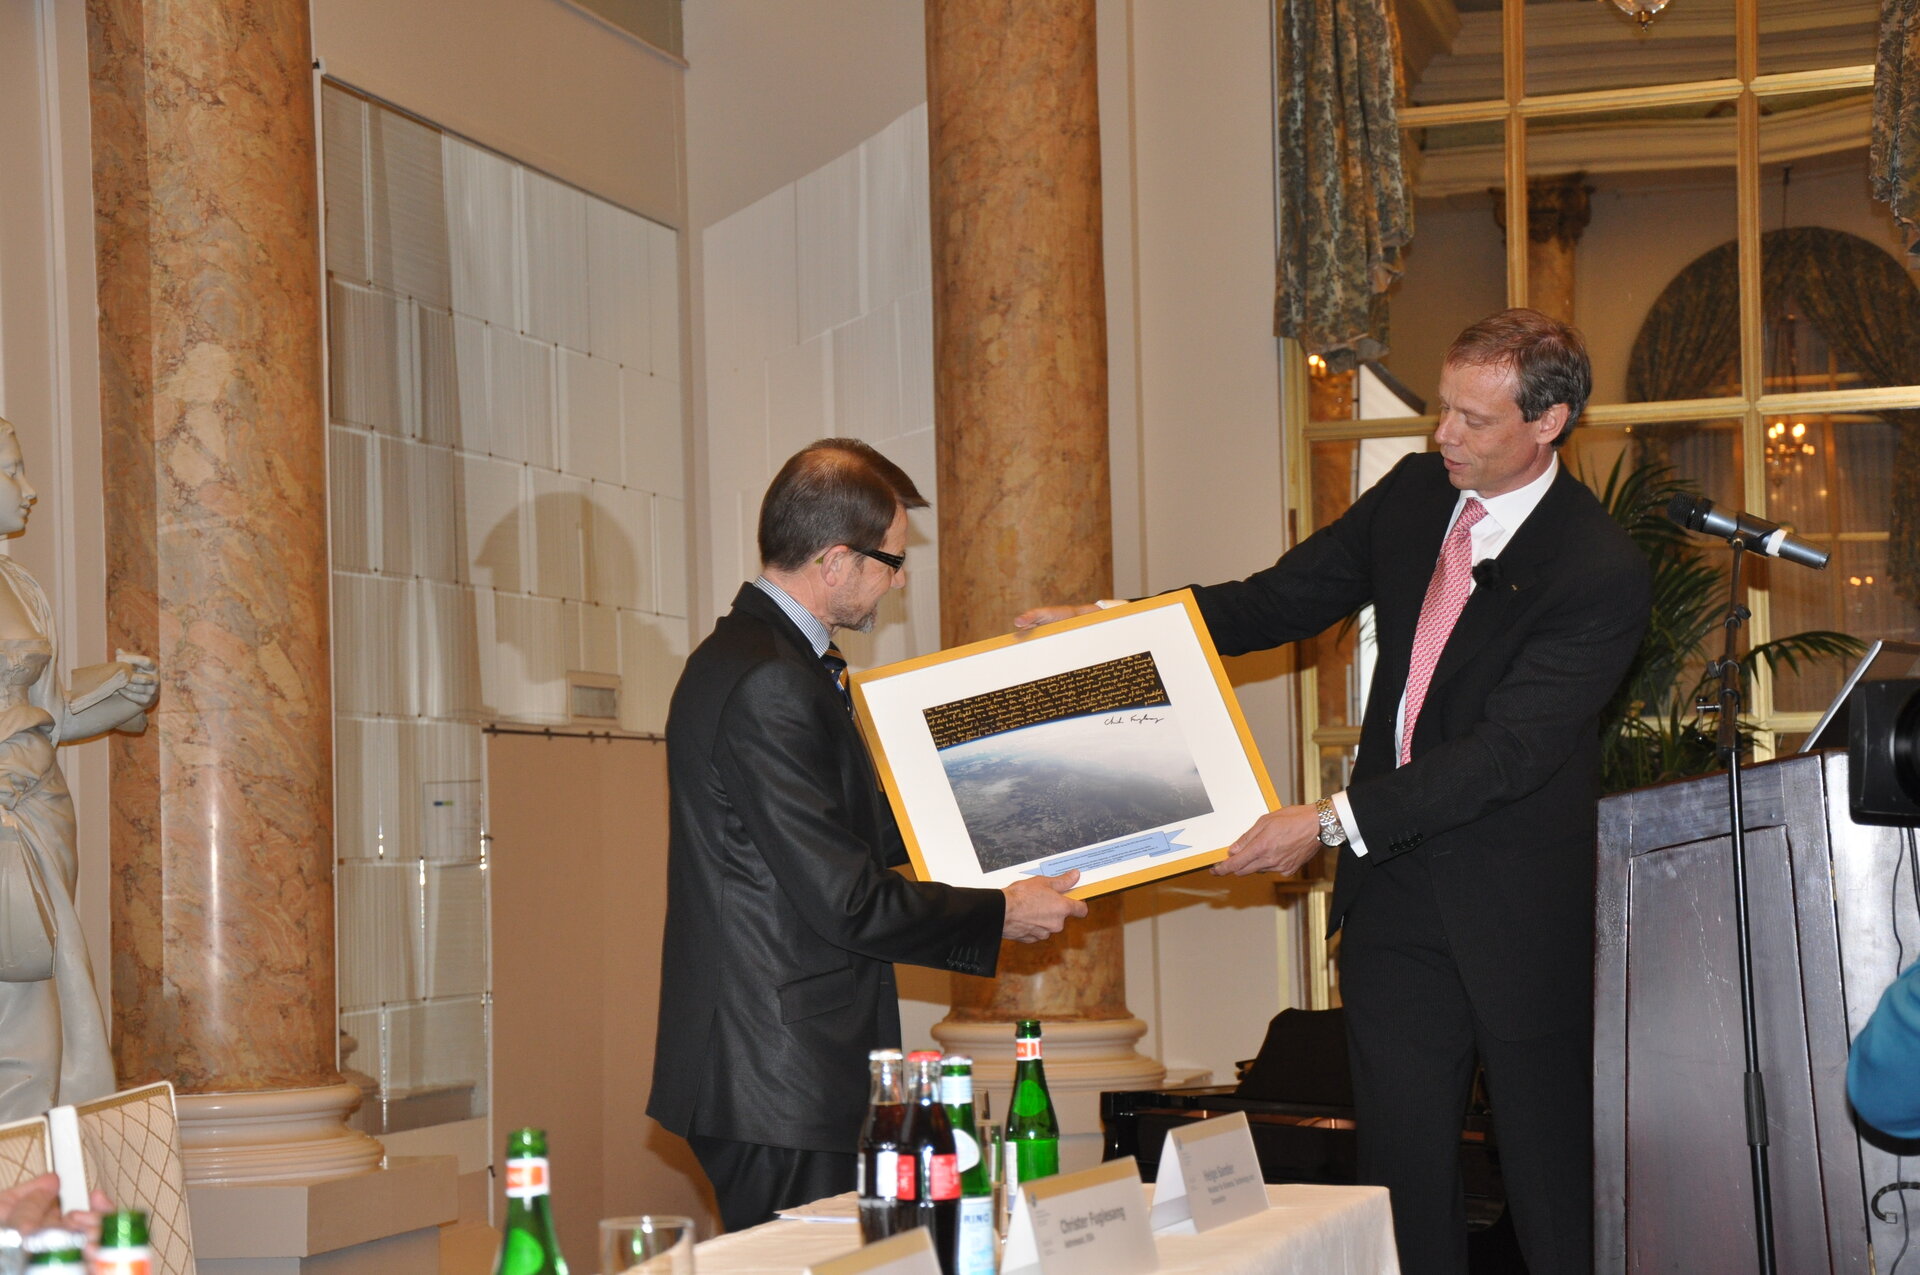 ESA astronaut C. Fuglesang (right) presenting a gift to H. Sander